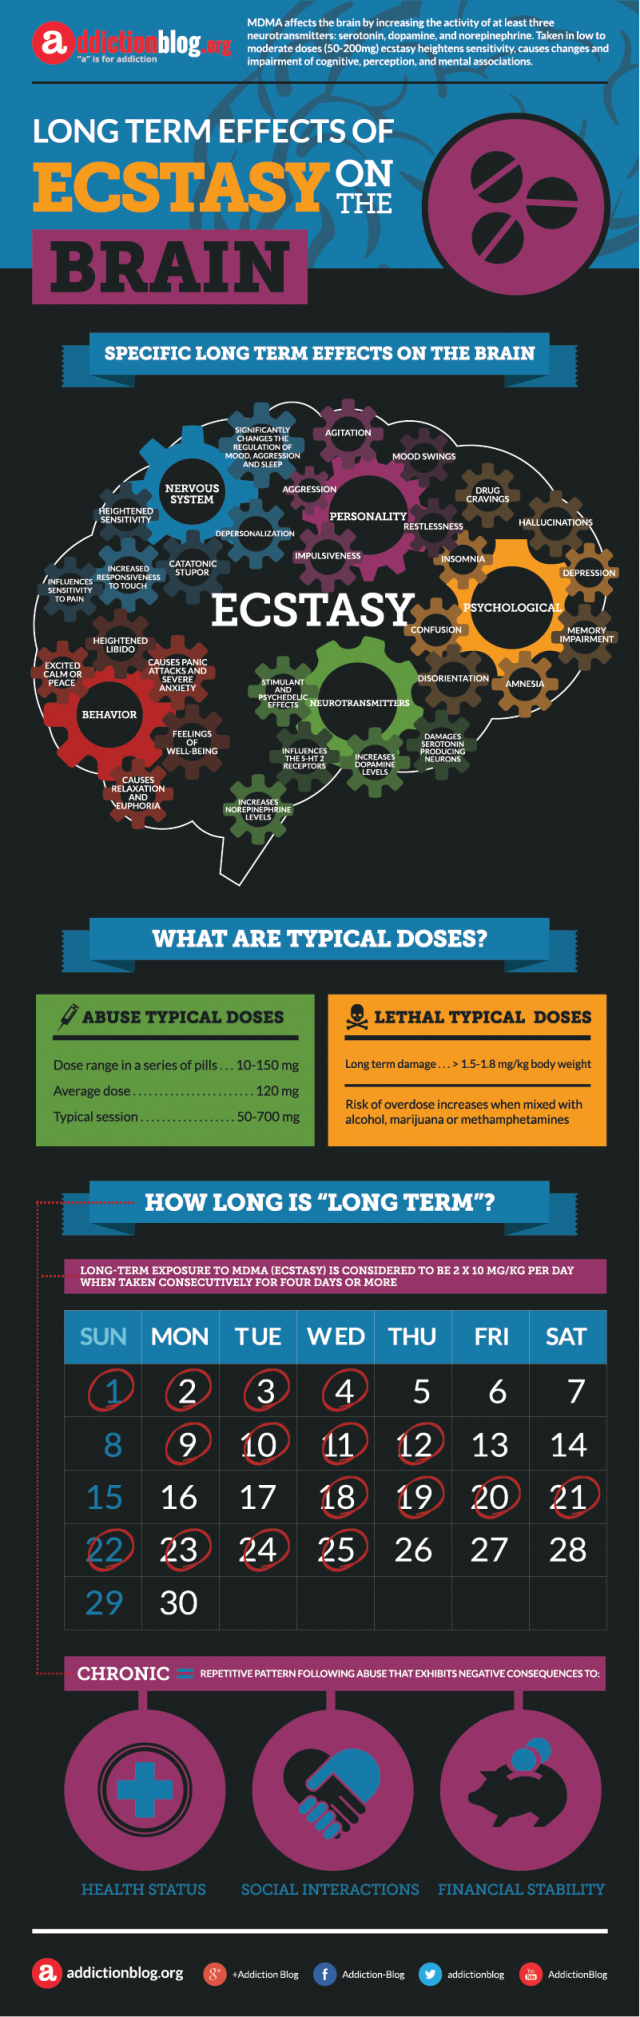 Long term effects of ecstasy on the brain (INFOGRAPHIC)